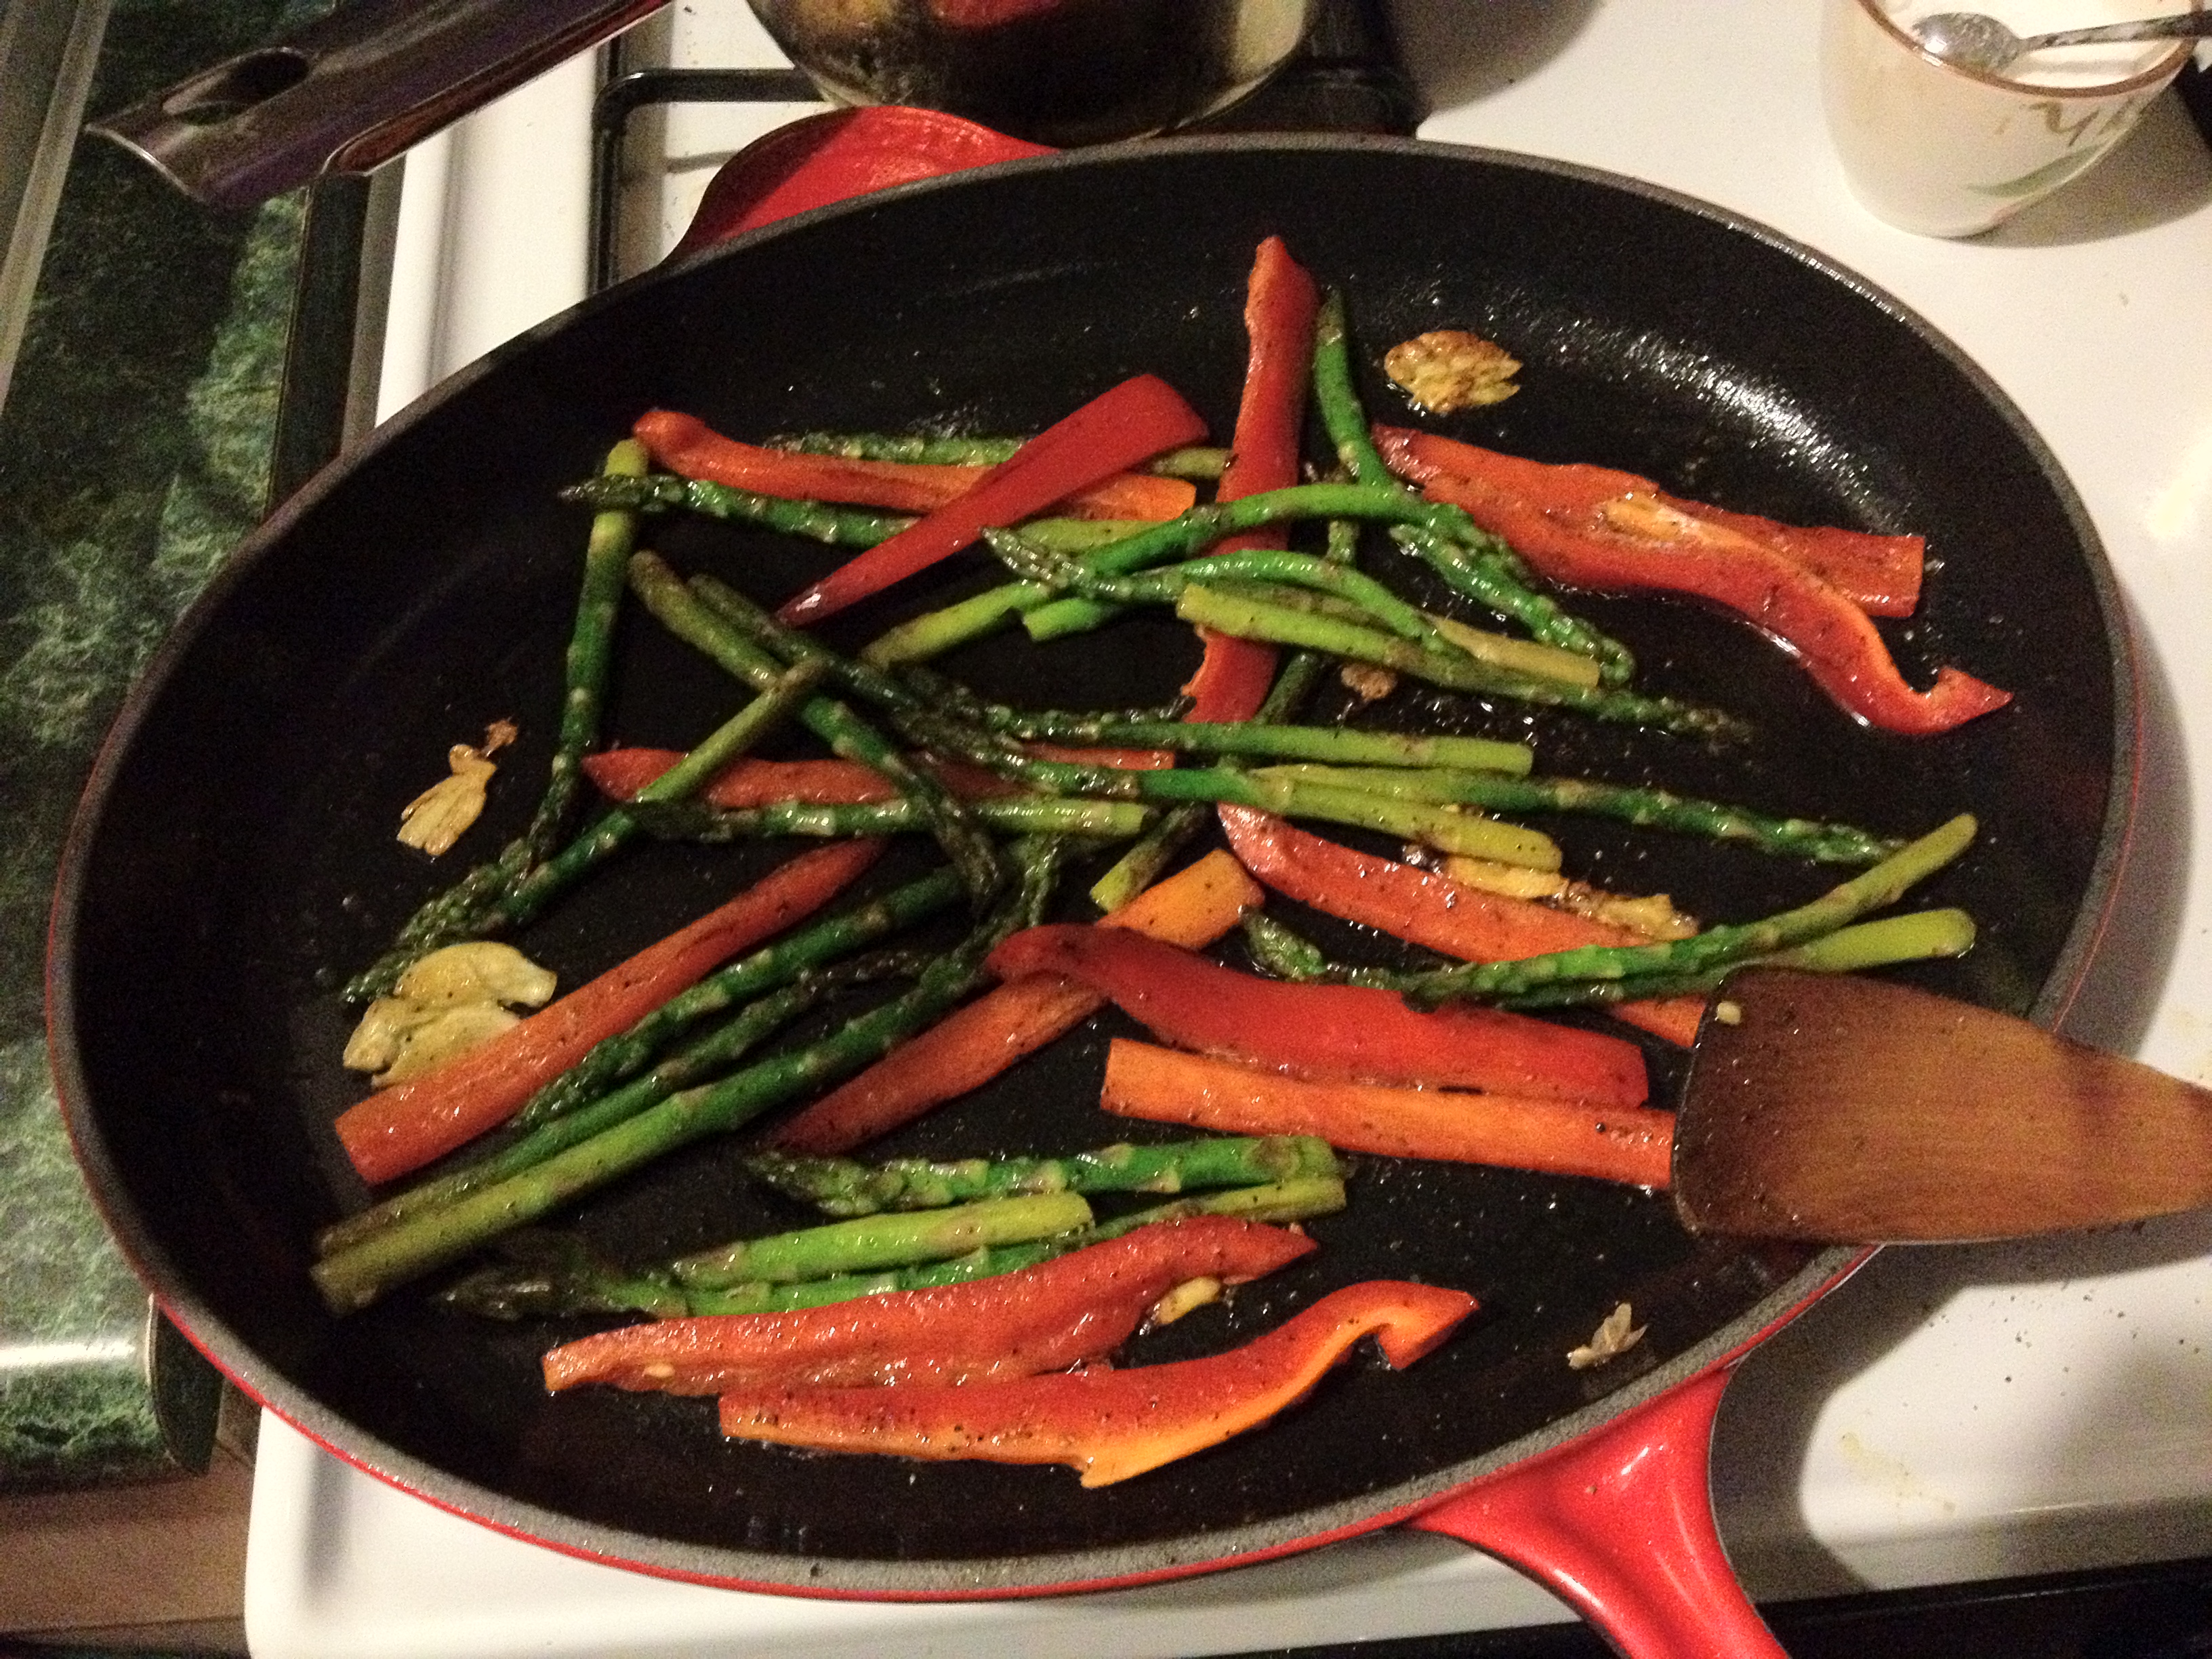 Asparagus and red peppers in a skillet.